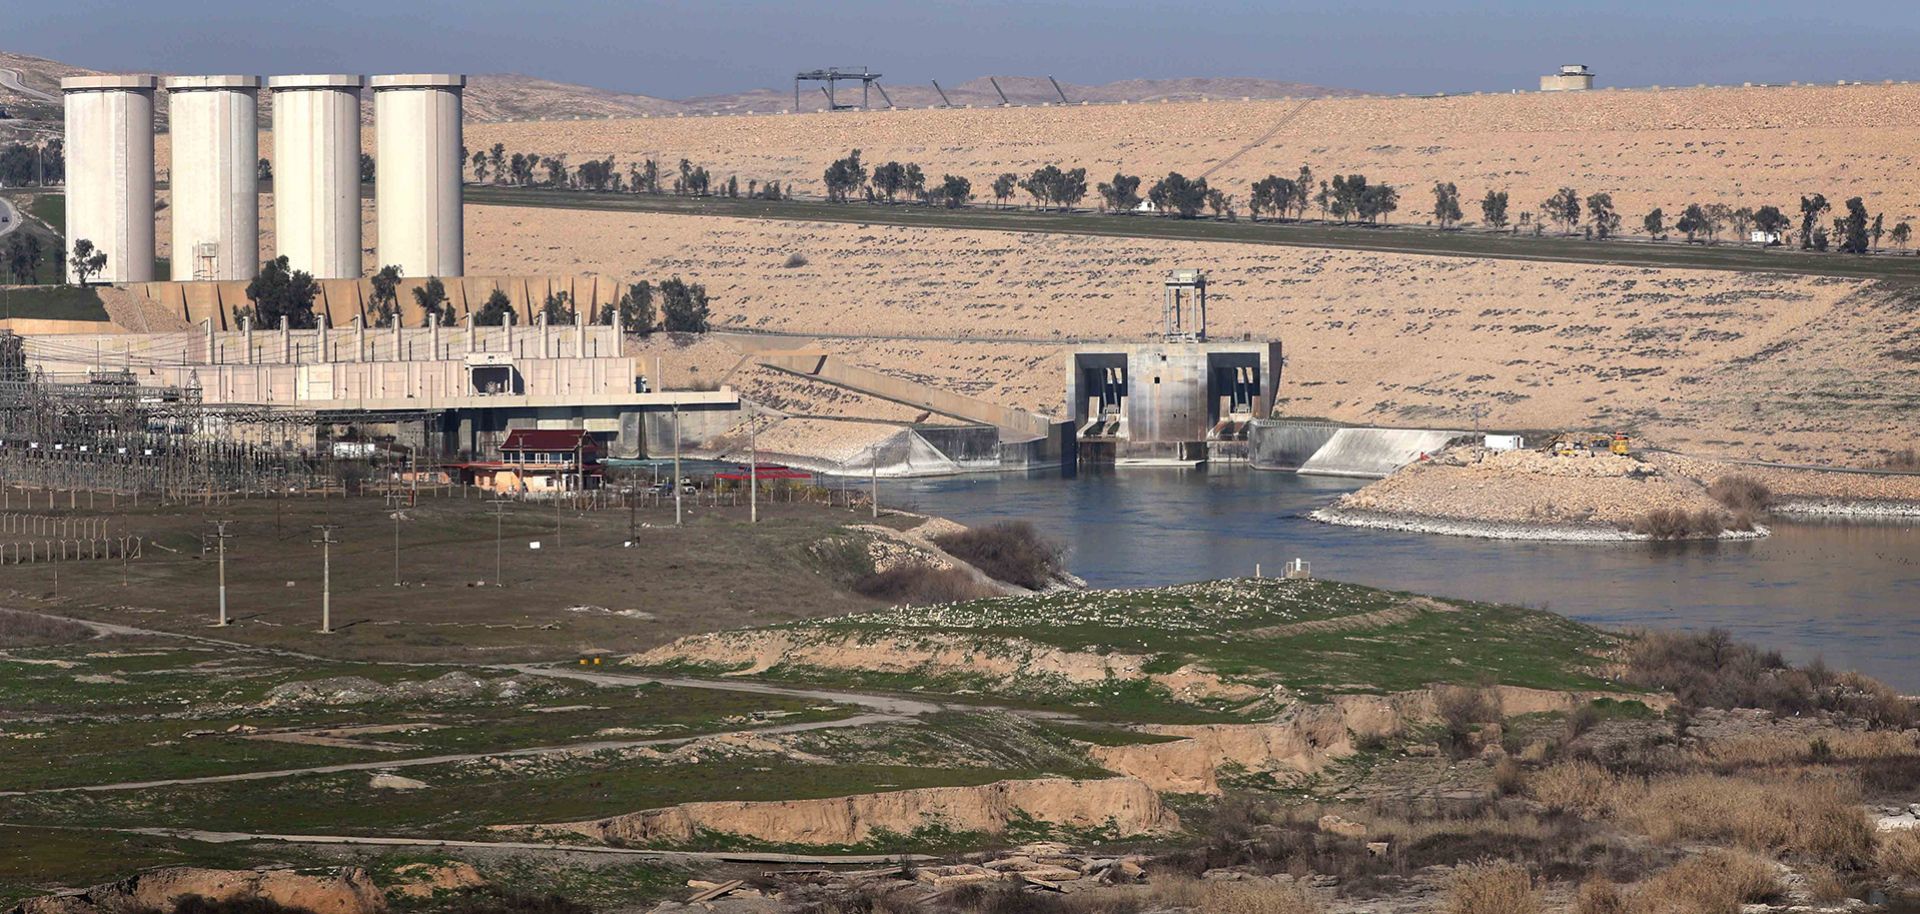 A picture taken on February 1, 2016, shows the Mosul Dam on the Tigris River, around 50 kilometres north of the Iraqi city of Mosul. The United States is monitoring Iraq's largest dam for signs of further deterioration that could point to an impending catastrophic collapse, US army officers said on January 28, 2016. The Islamic State (IS) jihadist group seized the Mosul Dam briefly in 2014, leading to a lapse in maintenance that weakened an already flawed structure, and Baghdad is seeking a company to make 